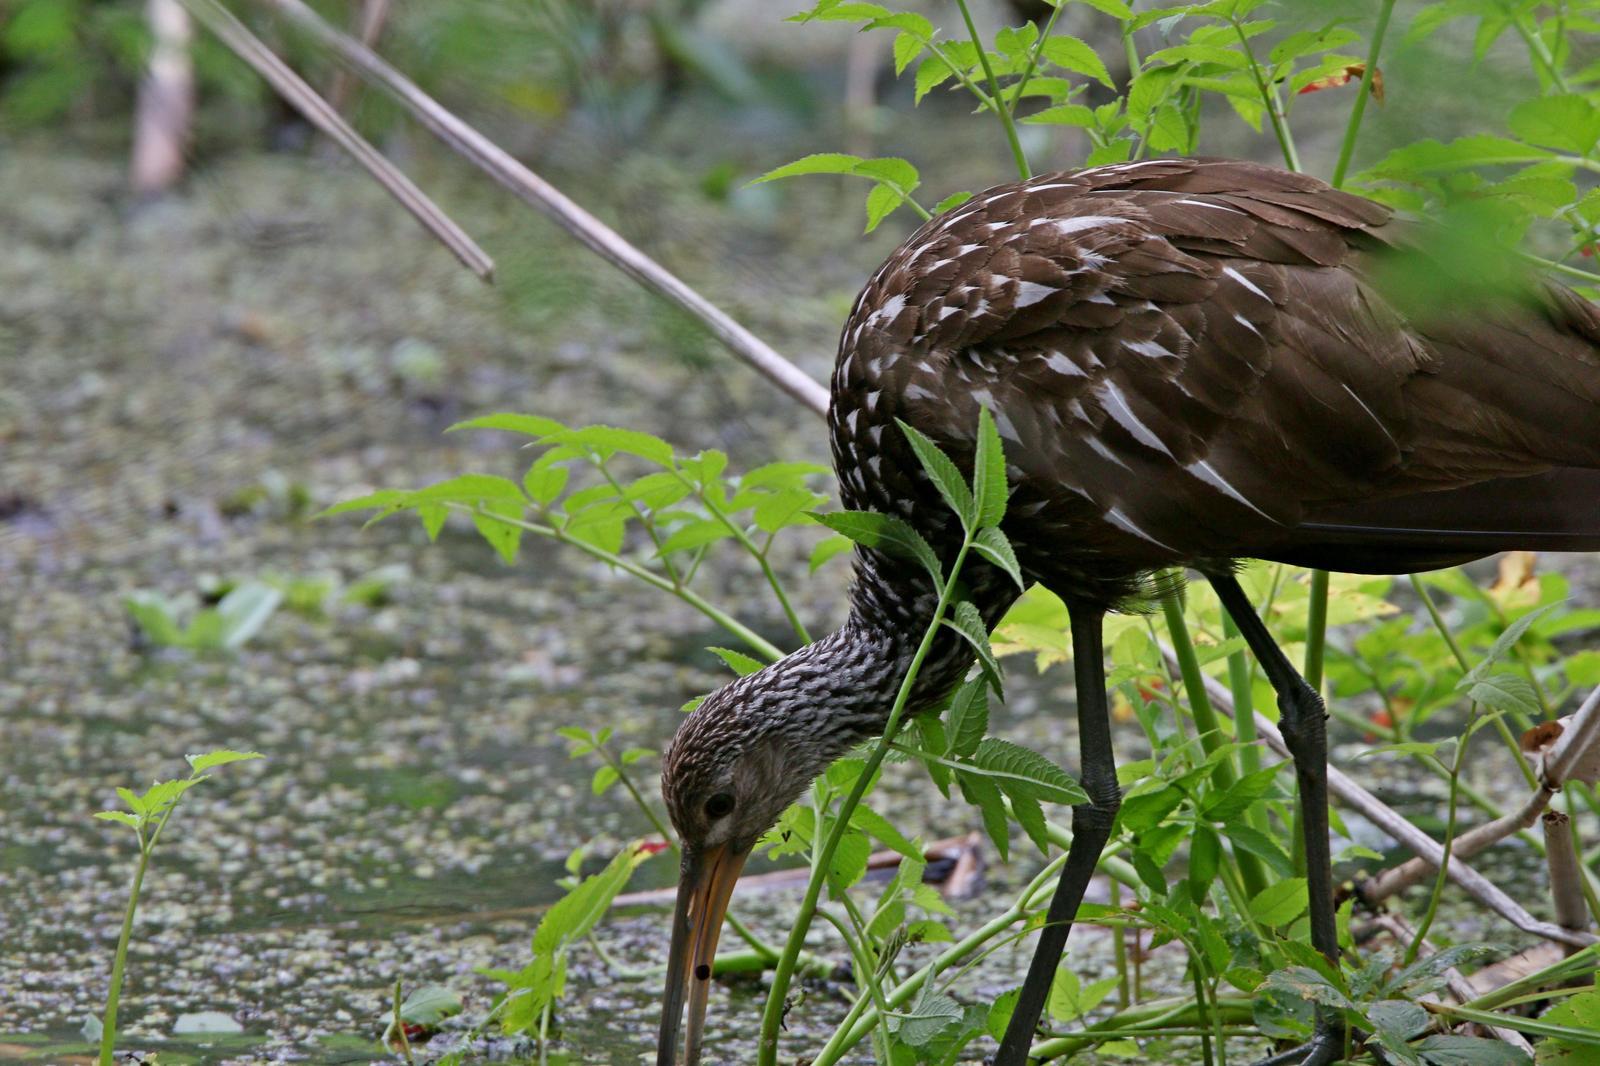 Limpkin Photo by Michael Blust